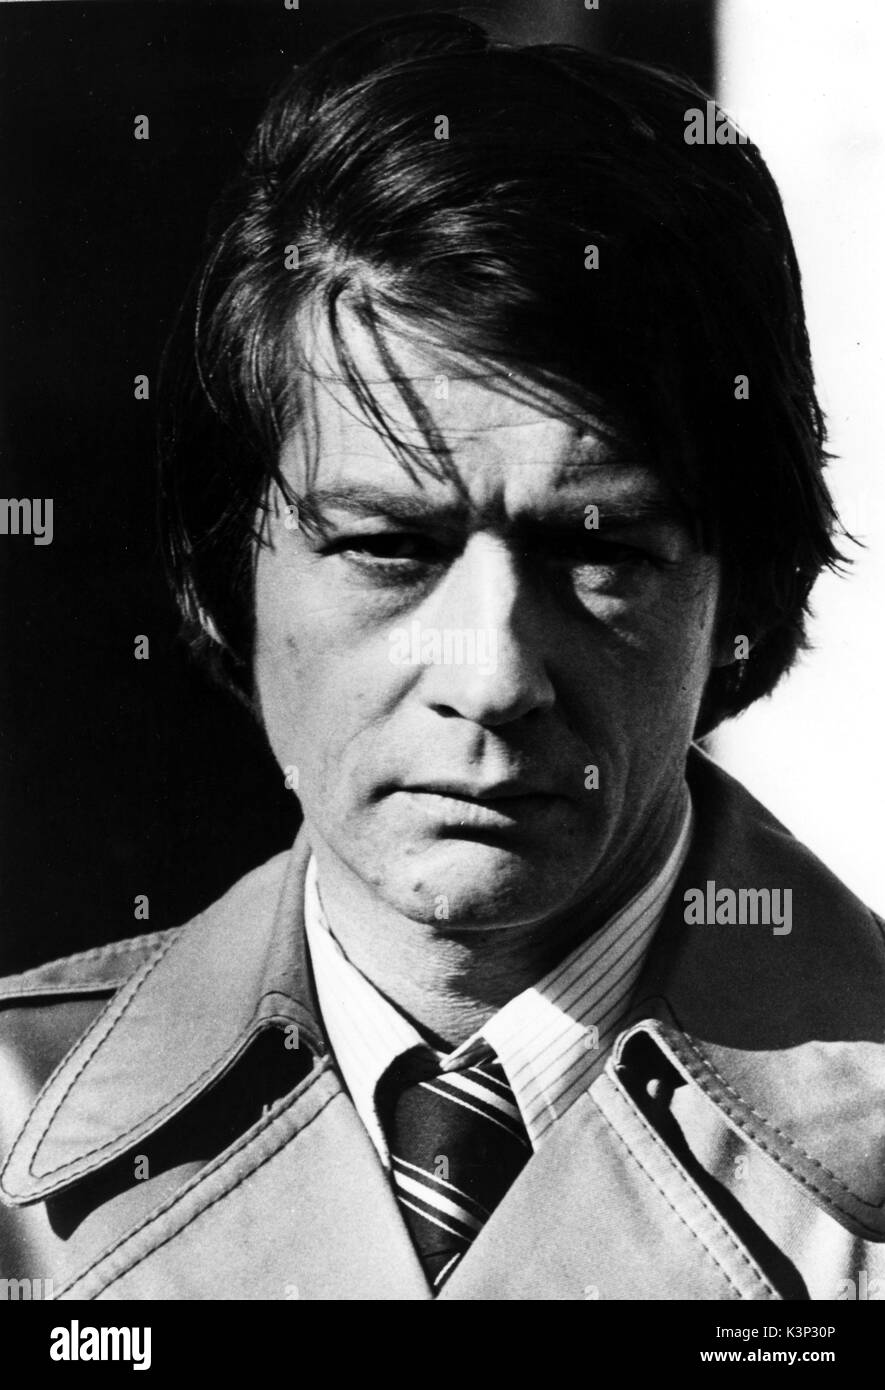 THE DISAPPEARANCE [BR / CAN 1977] JOHN HURT     Date: 1977 Stock Photo